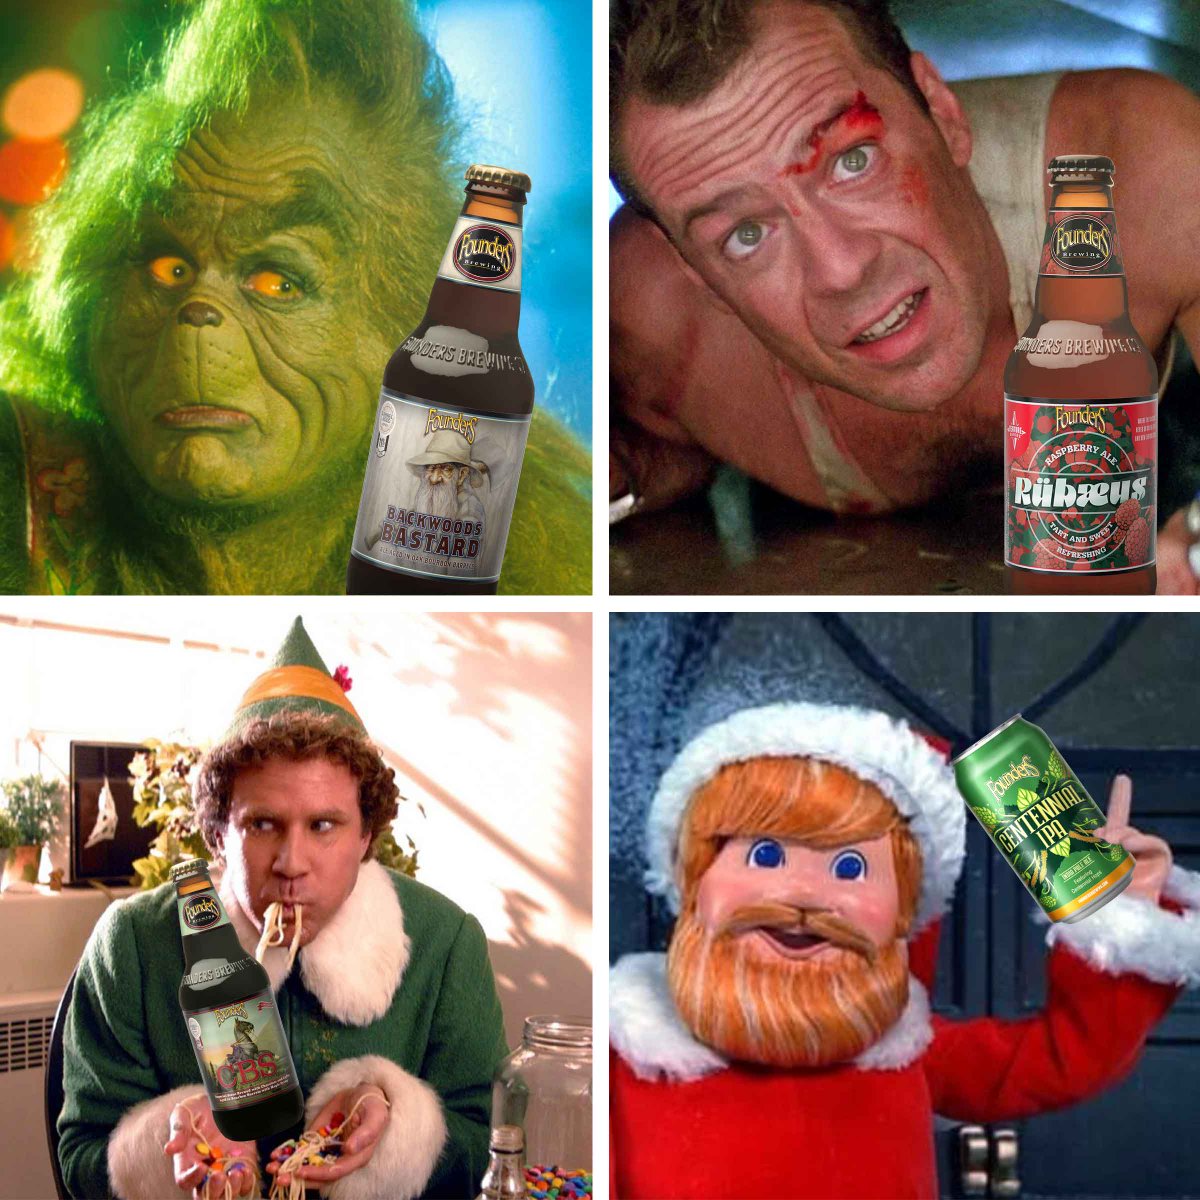 Please stop what you're doing and answer this very important question: Which of these holiday characters would you share a beer with?